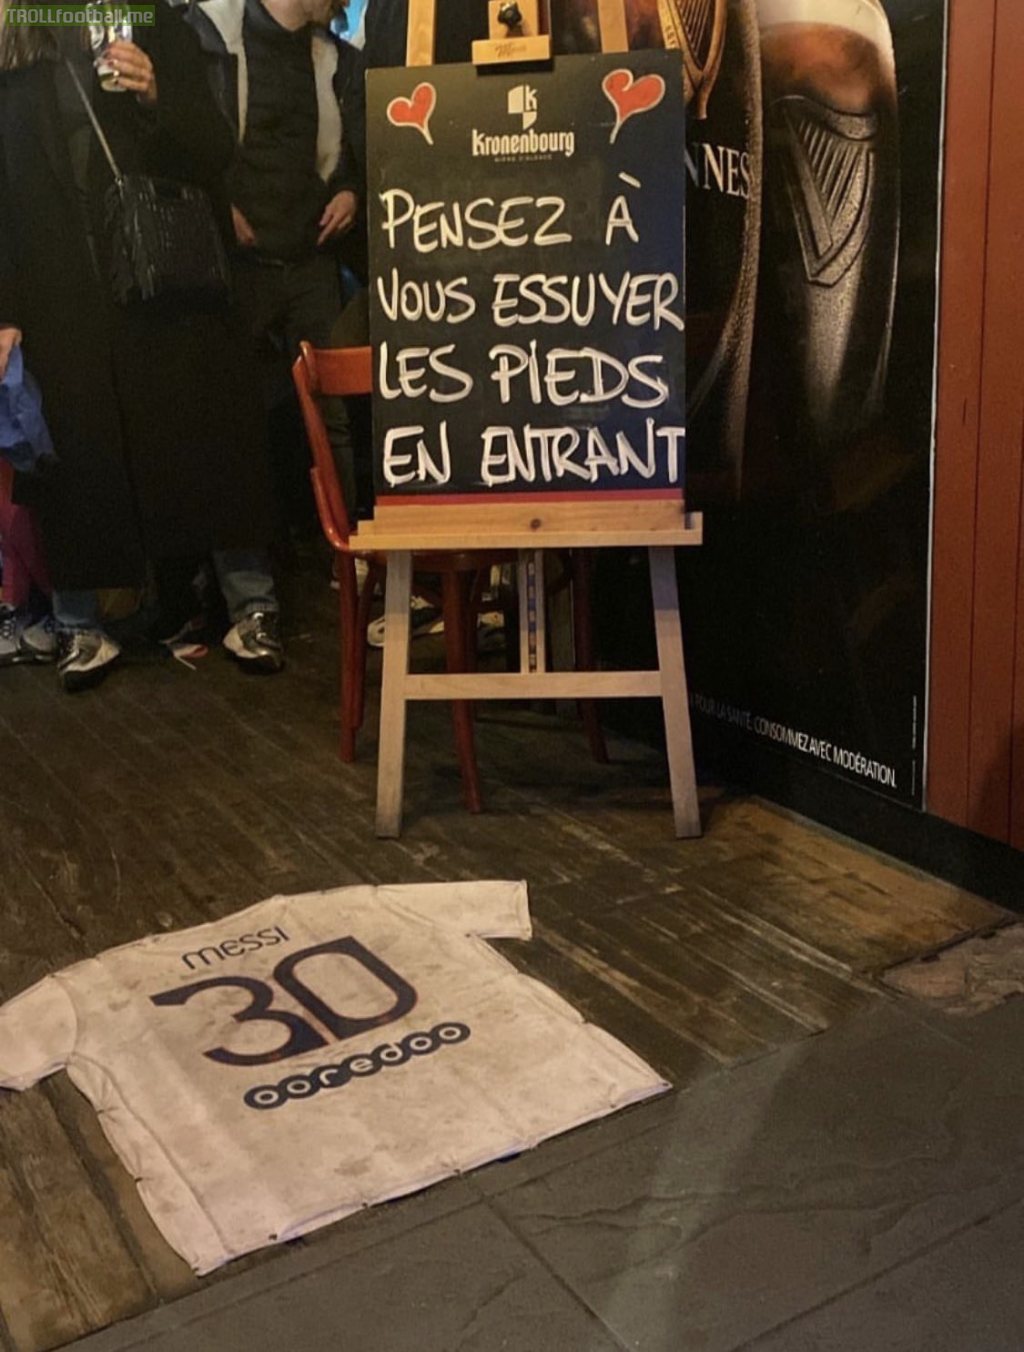 The entrance of a bar in France, "Remember to wipe your feet when you enter."